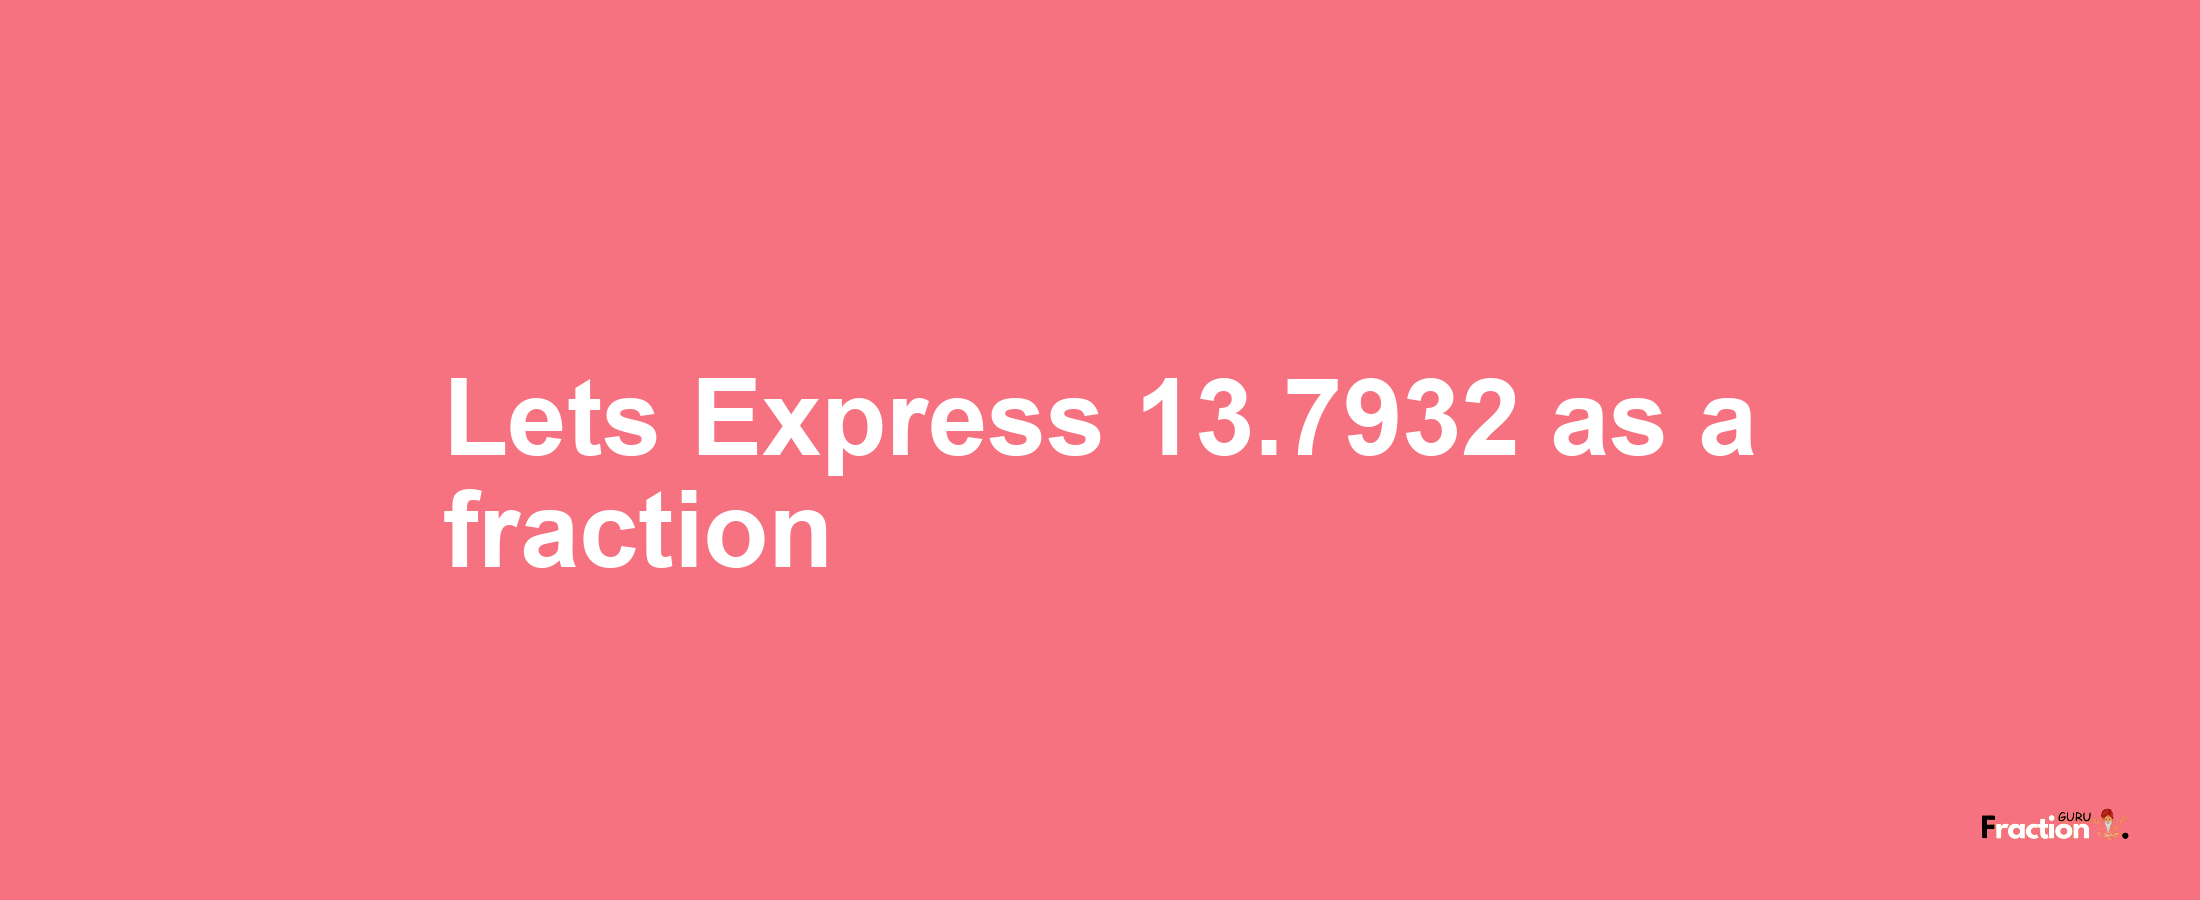 Lets Express 13.7932 as afraction